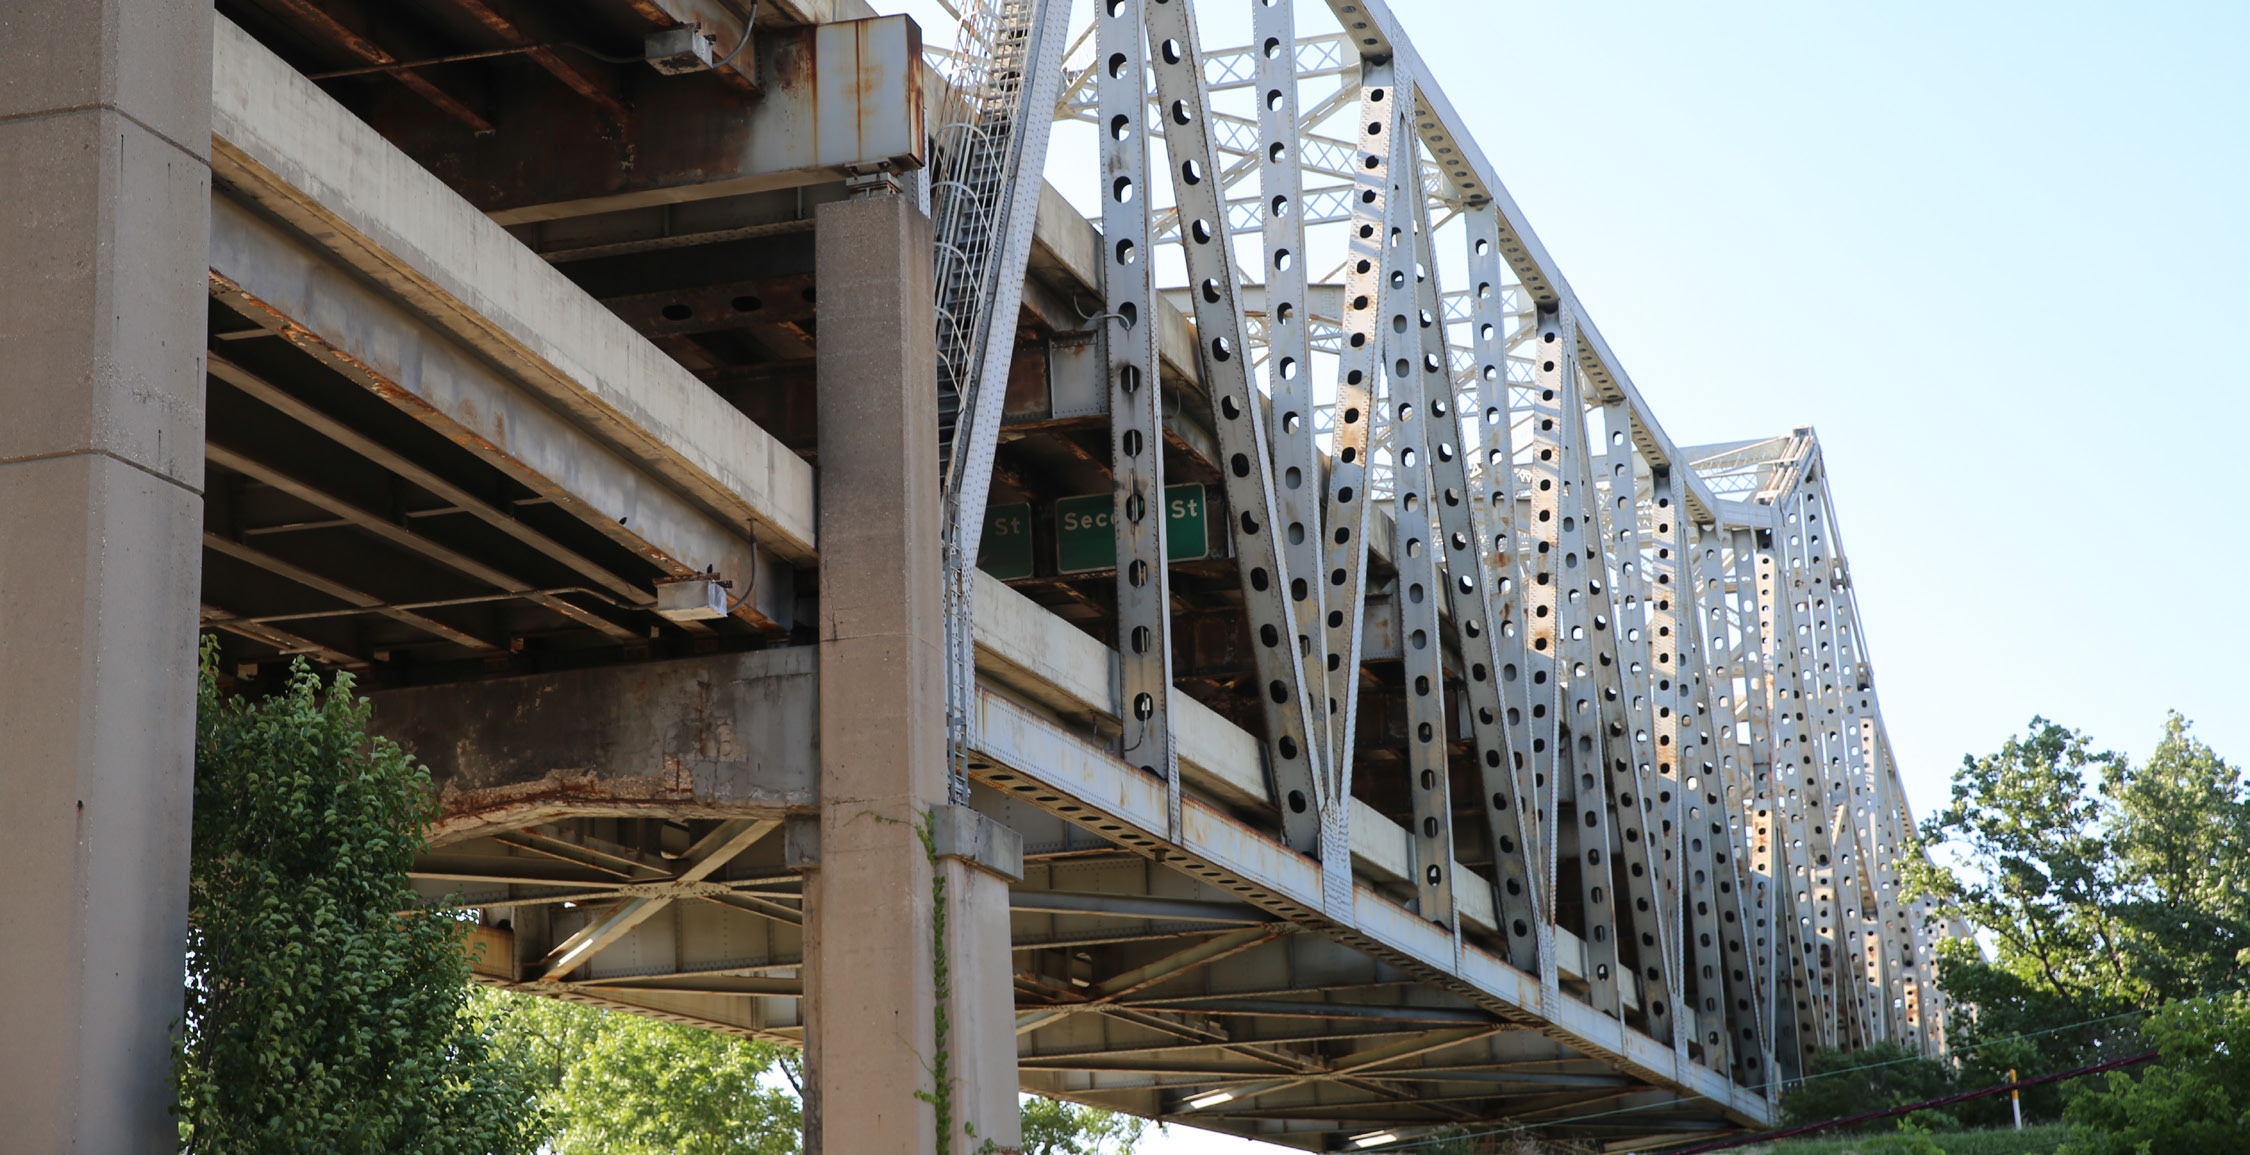 photo of a bridge from the underside